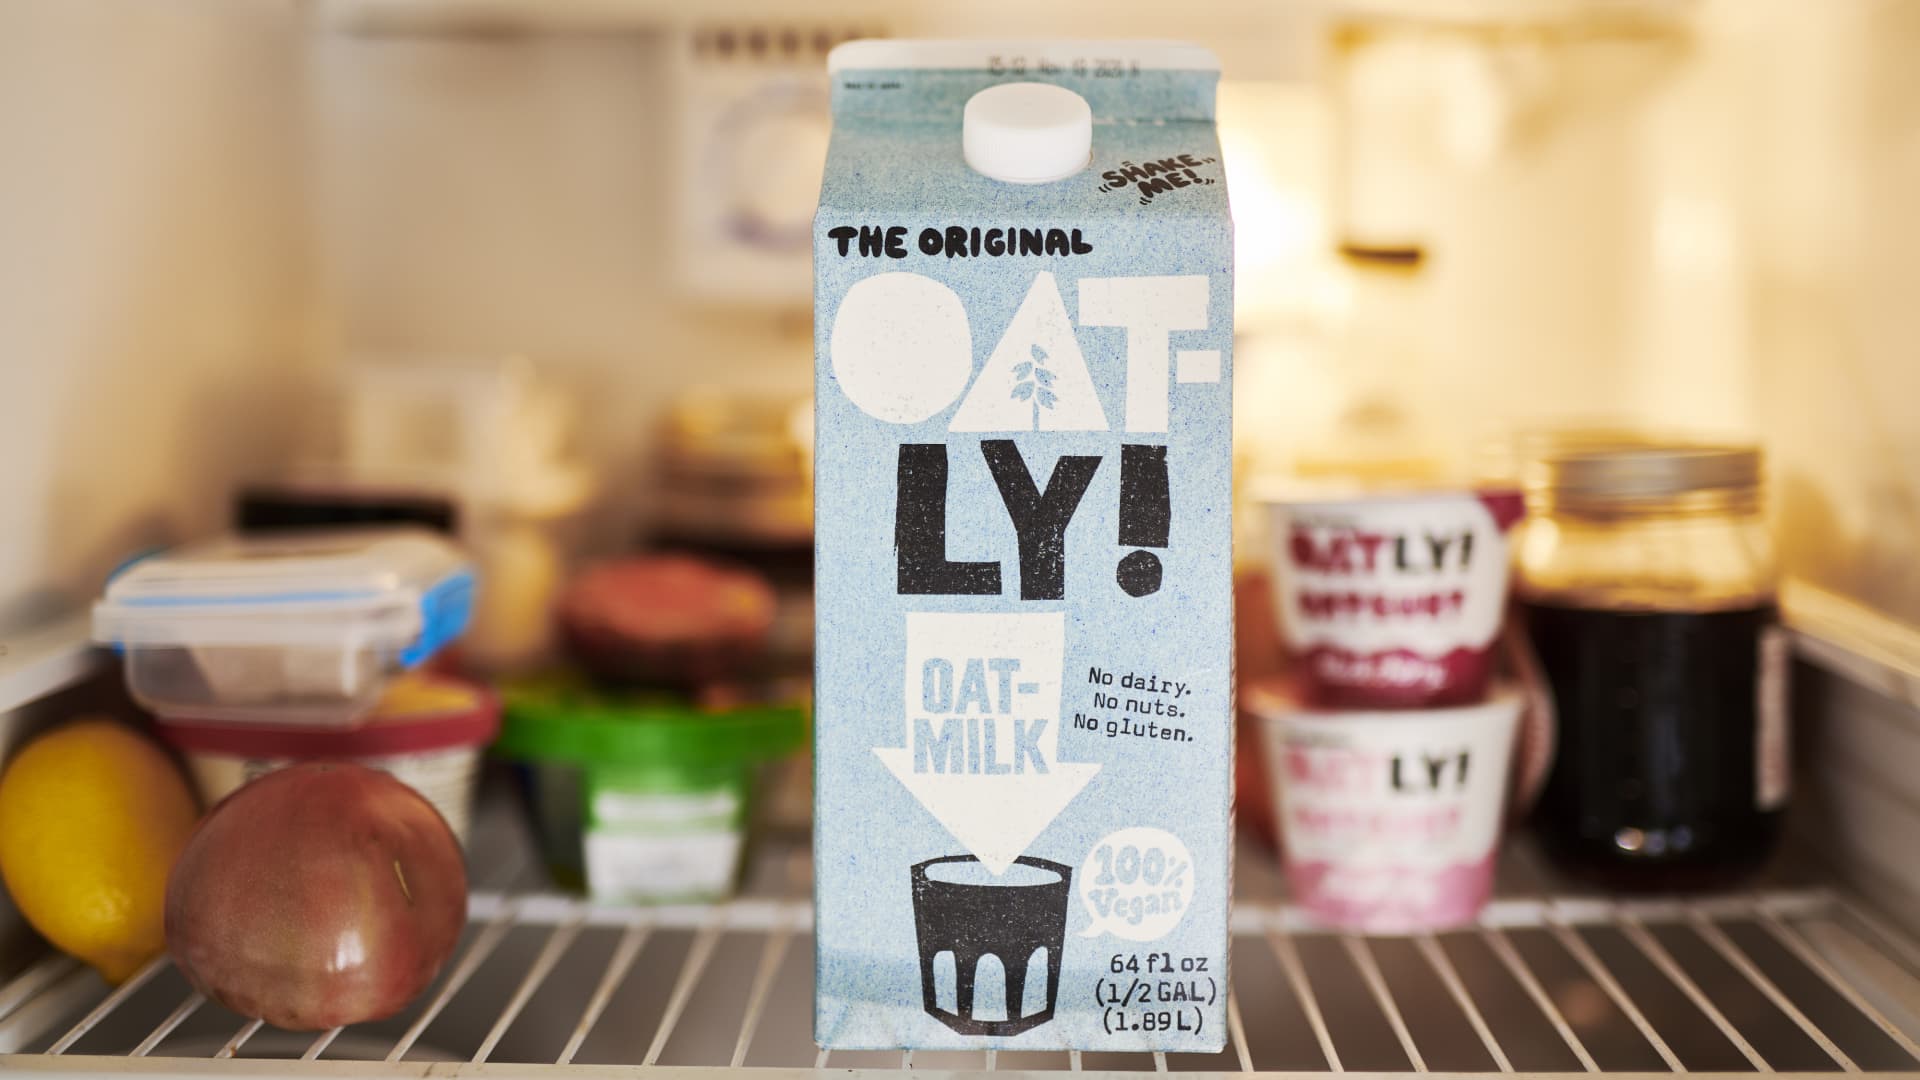 A carton of Oatly brand oat milk is arranged for a photograph in the Brooklyn borough of New York, U.S., on Tuesday, Sept. 15, 2020. Photographer: Gabby Jones/Bloomberg via Getty Images